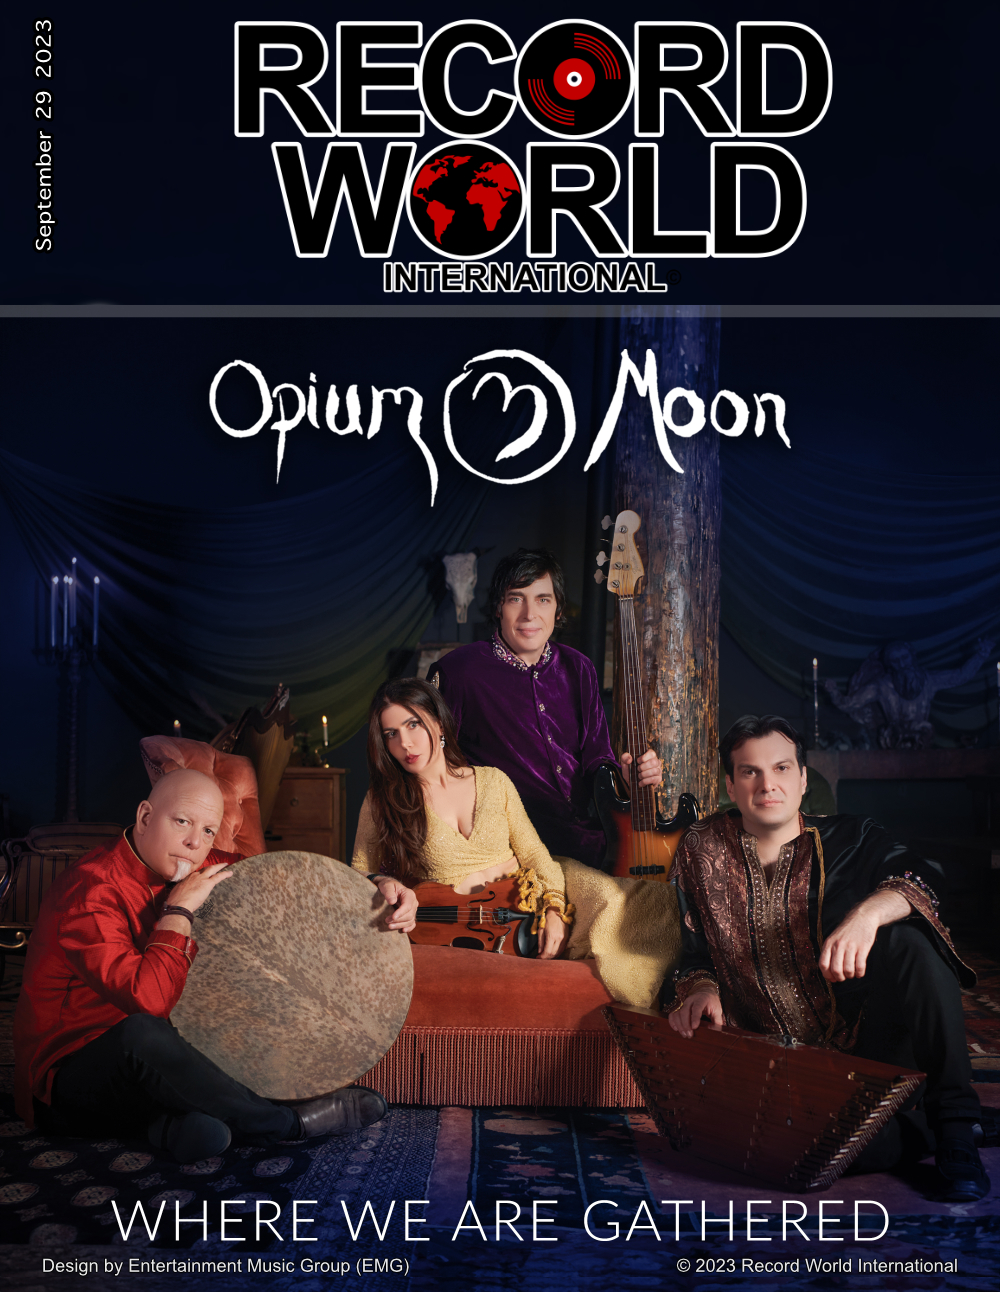 Twice-Nominated Grammy Opium Moon Launch New Album “Where We Are Gathered” 